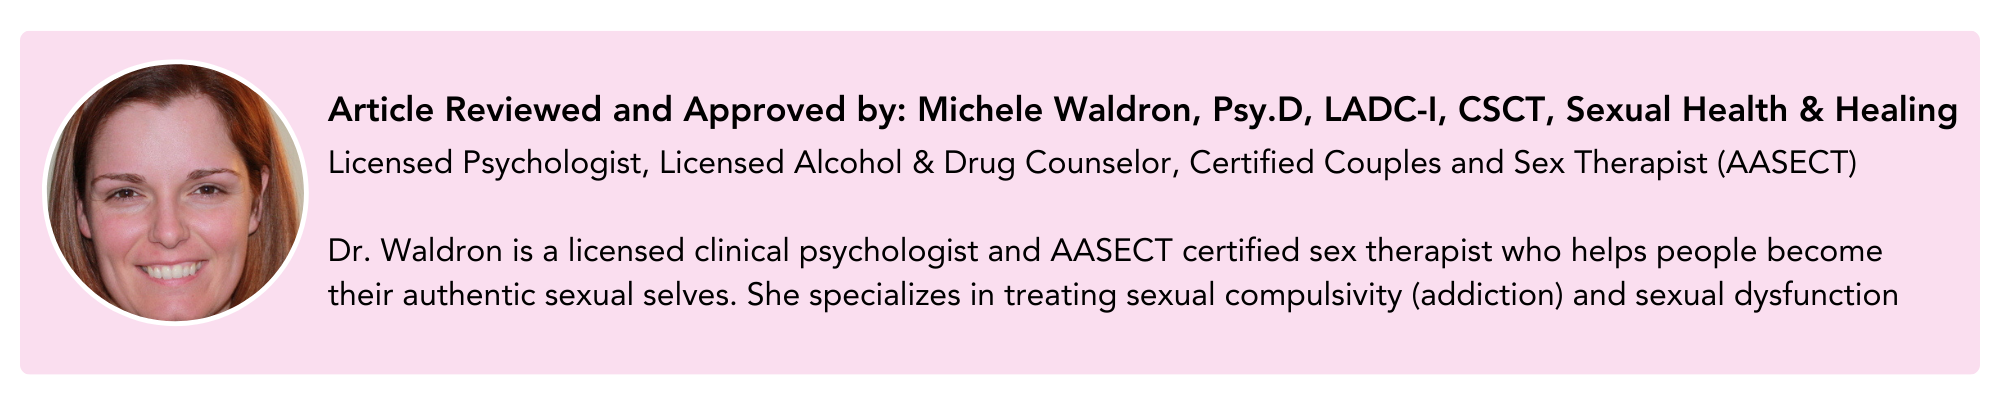 Article Reviewed and Approved by: Michele Waldron, Psy.D, LADC-I, CSCT, Sexual Health & Healing. Licensed Psychologist, Licensed Alcohol & Drug Counselor, Certified Couples and Sex Therapist (AASECT)  Dr. Waldron is a licensed clinical psychologist and AASECT certified sex therapist who helps people become their authentic sexual selves. She specializes in treating sexual compulsivity (addiction) and sexual dysfunction